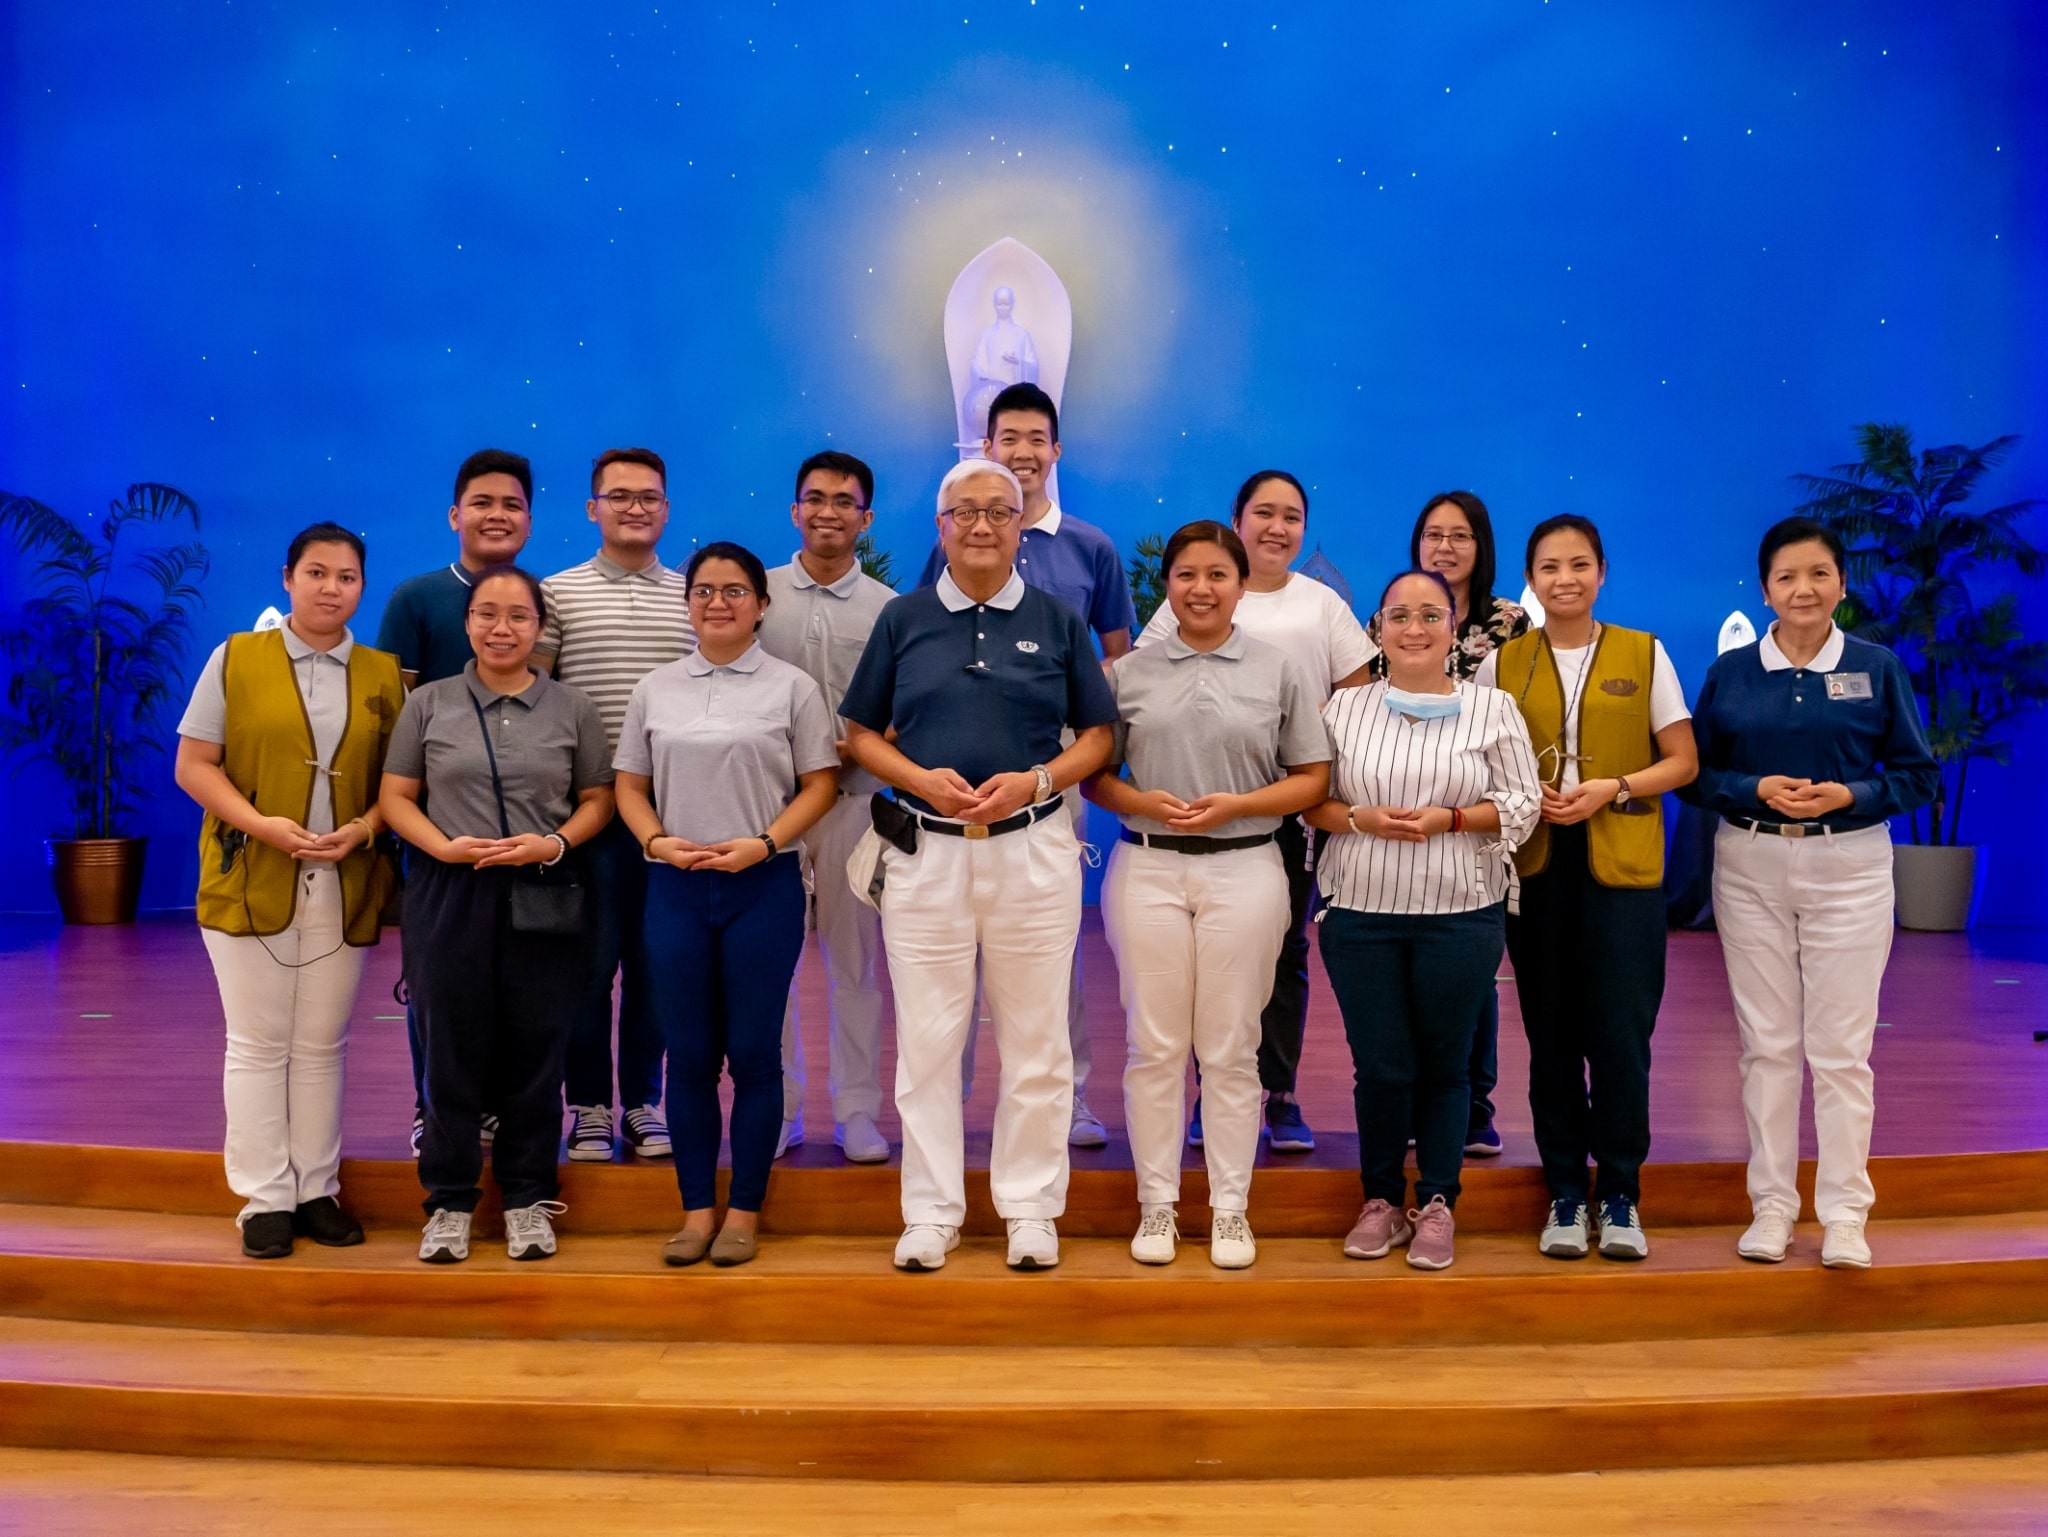 At the youth camp, Tzu Chi alumni gather for a photo with Tzu Chi Philippines CEO Henry Yuňez (front row, fourth from left) and Tzu Chi Education Committee volunteer Rosa So (front row, first from right). 【Photo by Daniel Lazar】